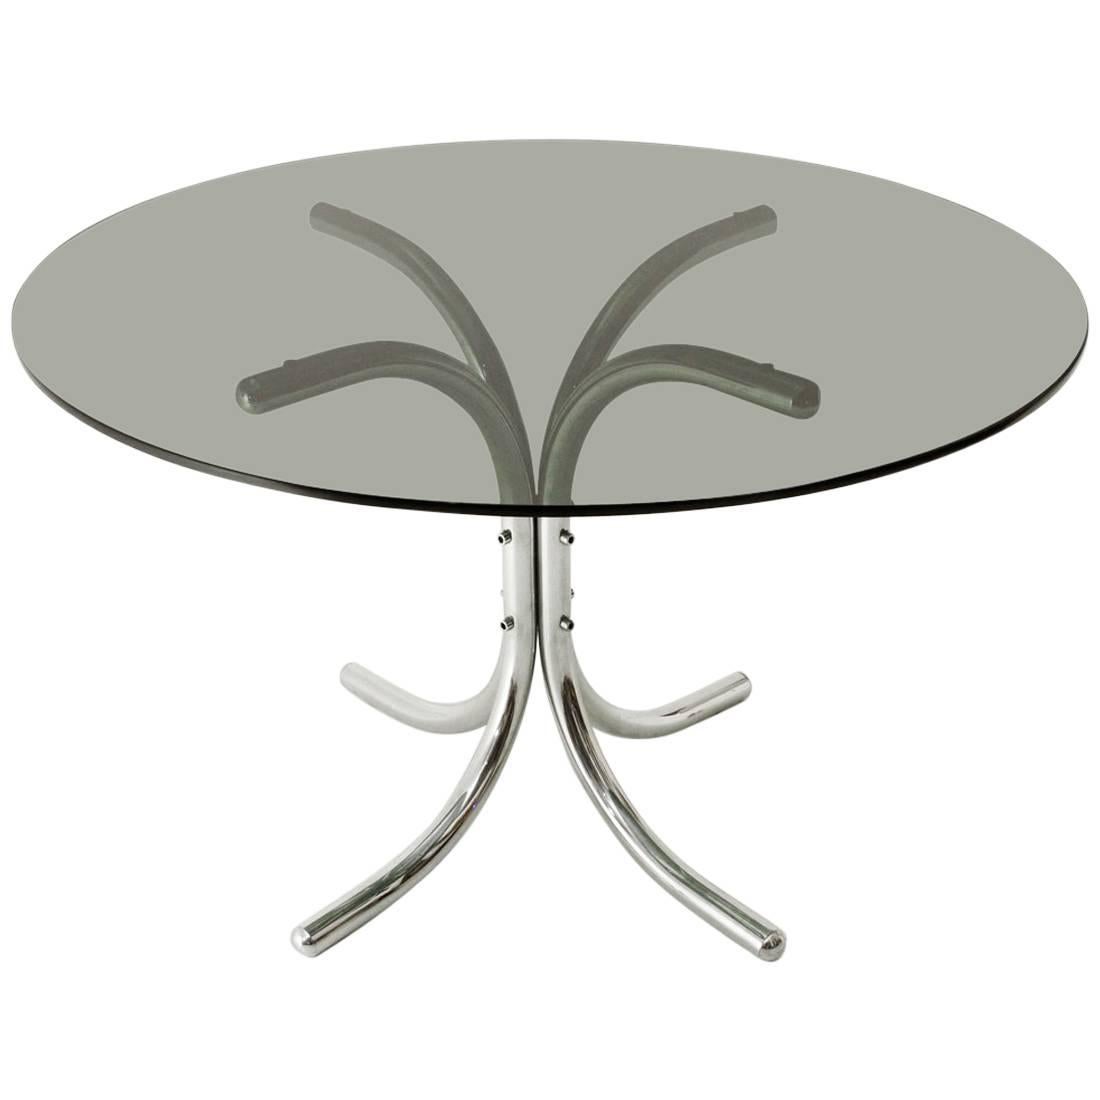 Italian Chromed Dining Table with Round Glass Top, 1970s